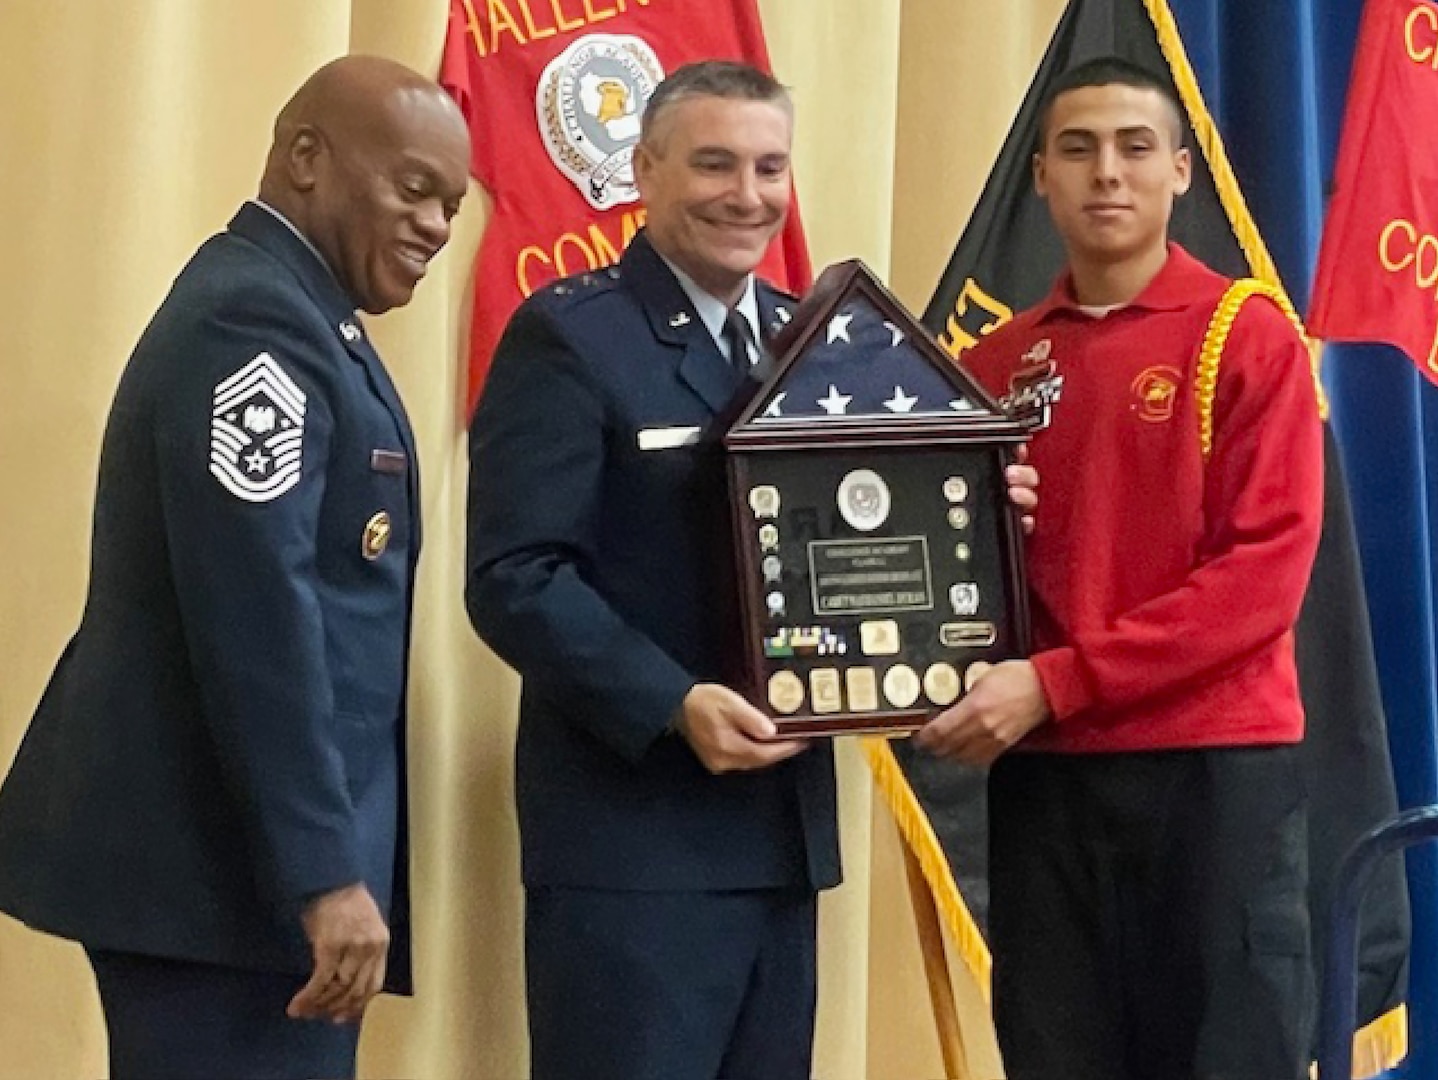 Senior Enlisted Advisor Tony Whitehead, SEA to the chief, National Guard Bureau,and Maj. Gen. Paul Knapp, Wisconsin’s adjutant general, present the Distinguished Honor Graduate trophy to Nathaniel Duran of Beloit, Wis., during a ChalleNGe Academy graduation ceremony Dec. 16, 2023, for 98 cadets from 33 Wisconsin counties at Baraboo High School in Baraboo, Wis.